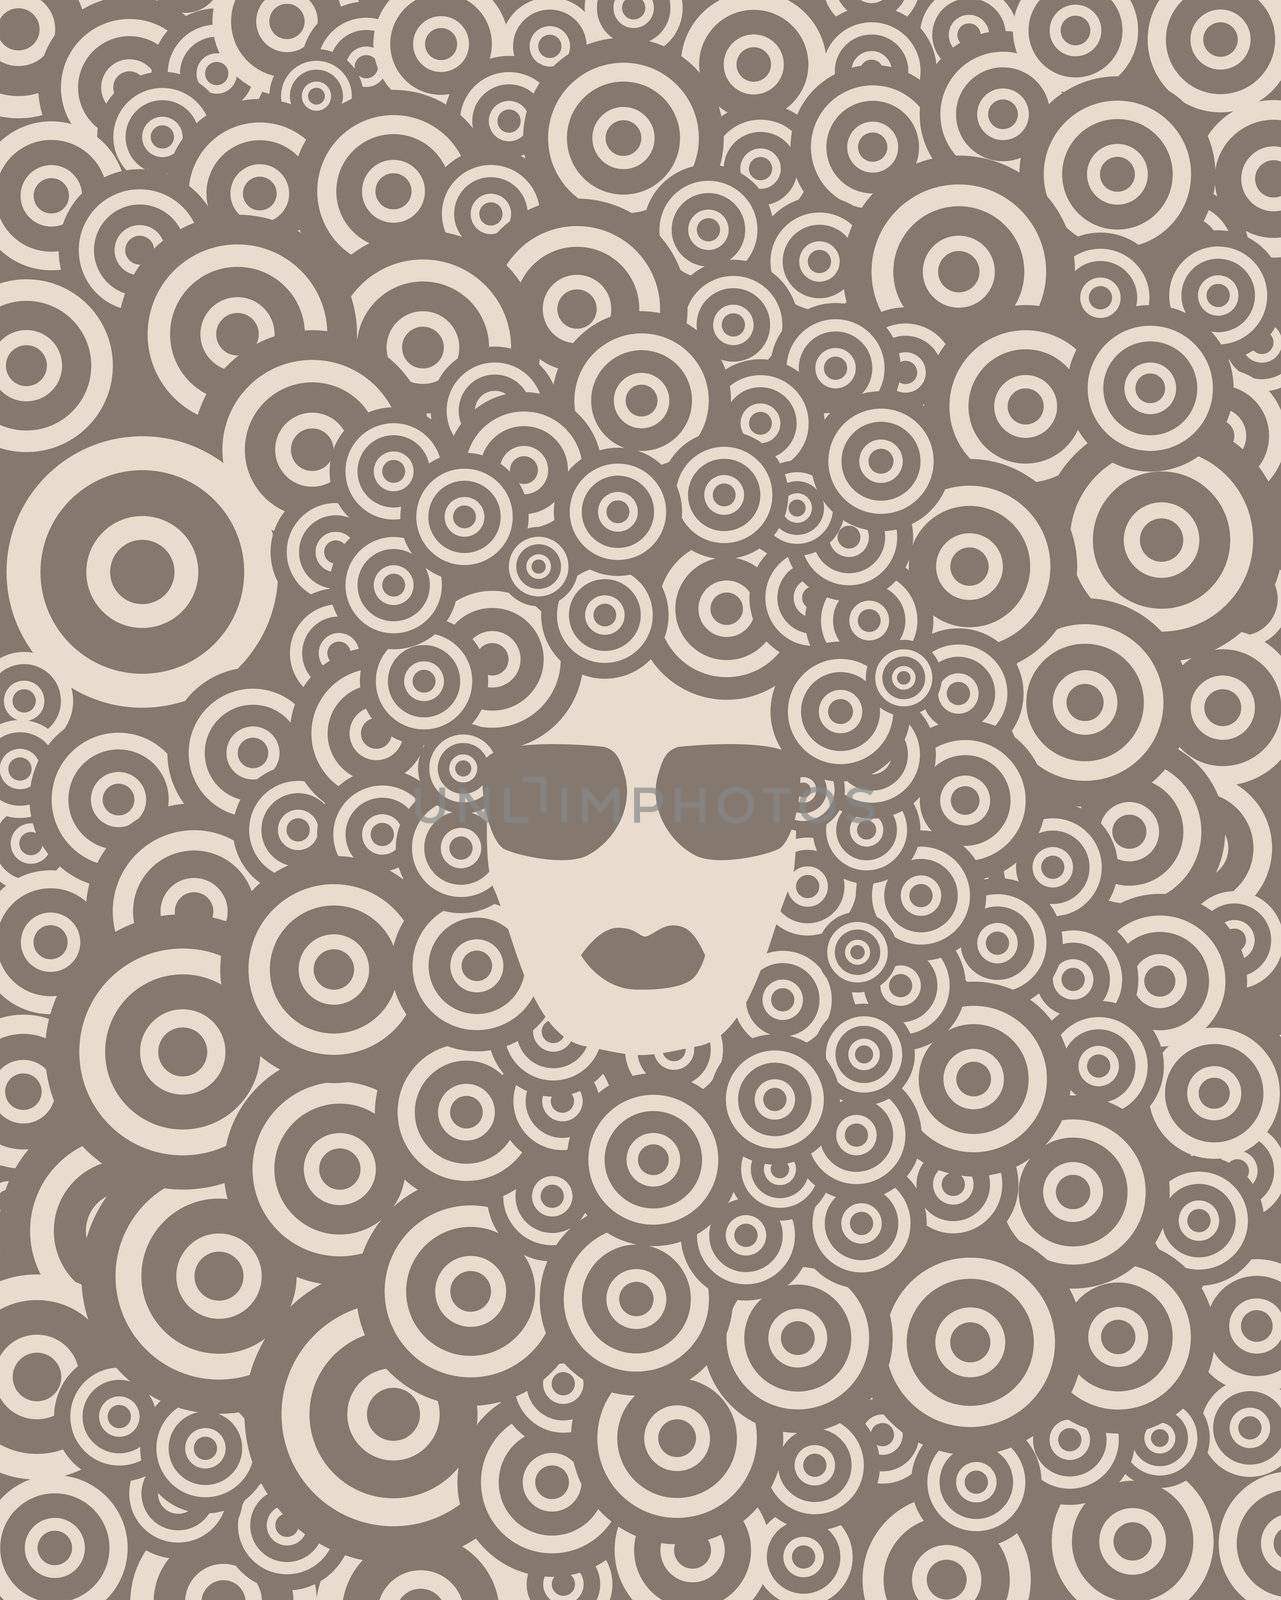 face of funky girl in glasses on abstract background with circles